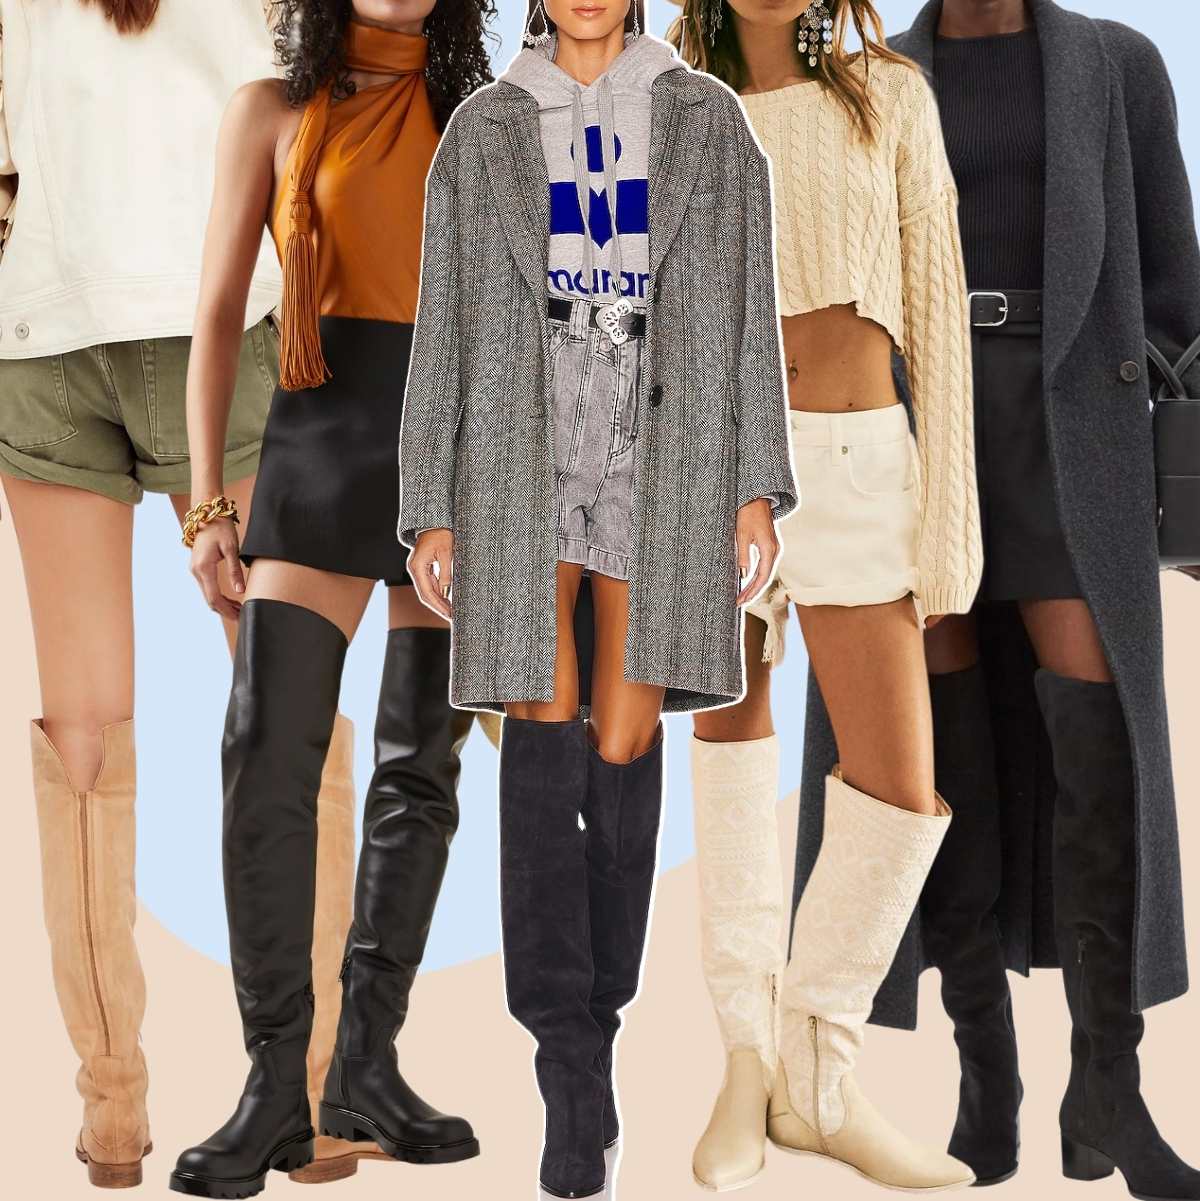 How to Wear Thigh High Boots Outfits Over 35 Styling Ideas!